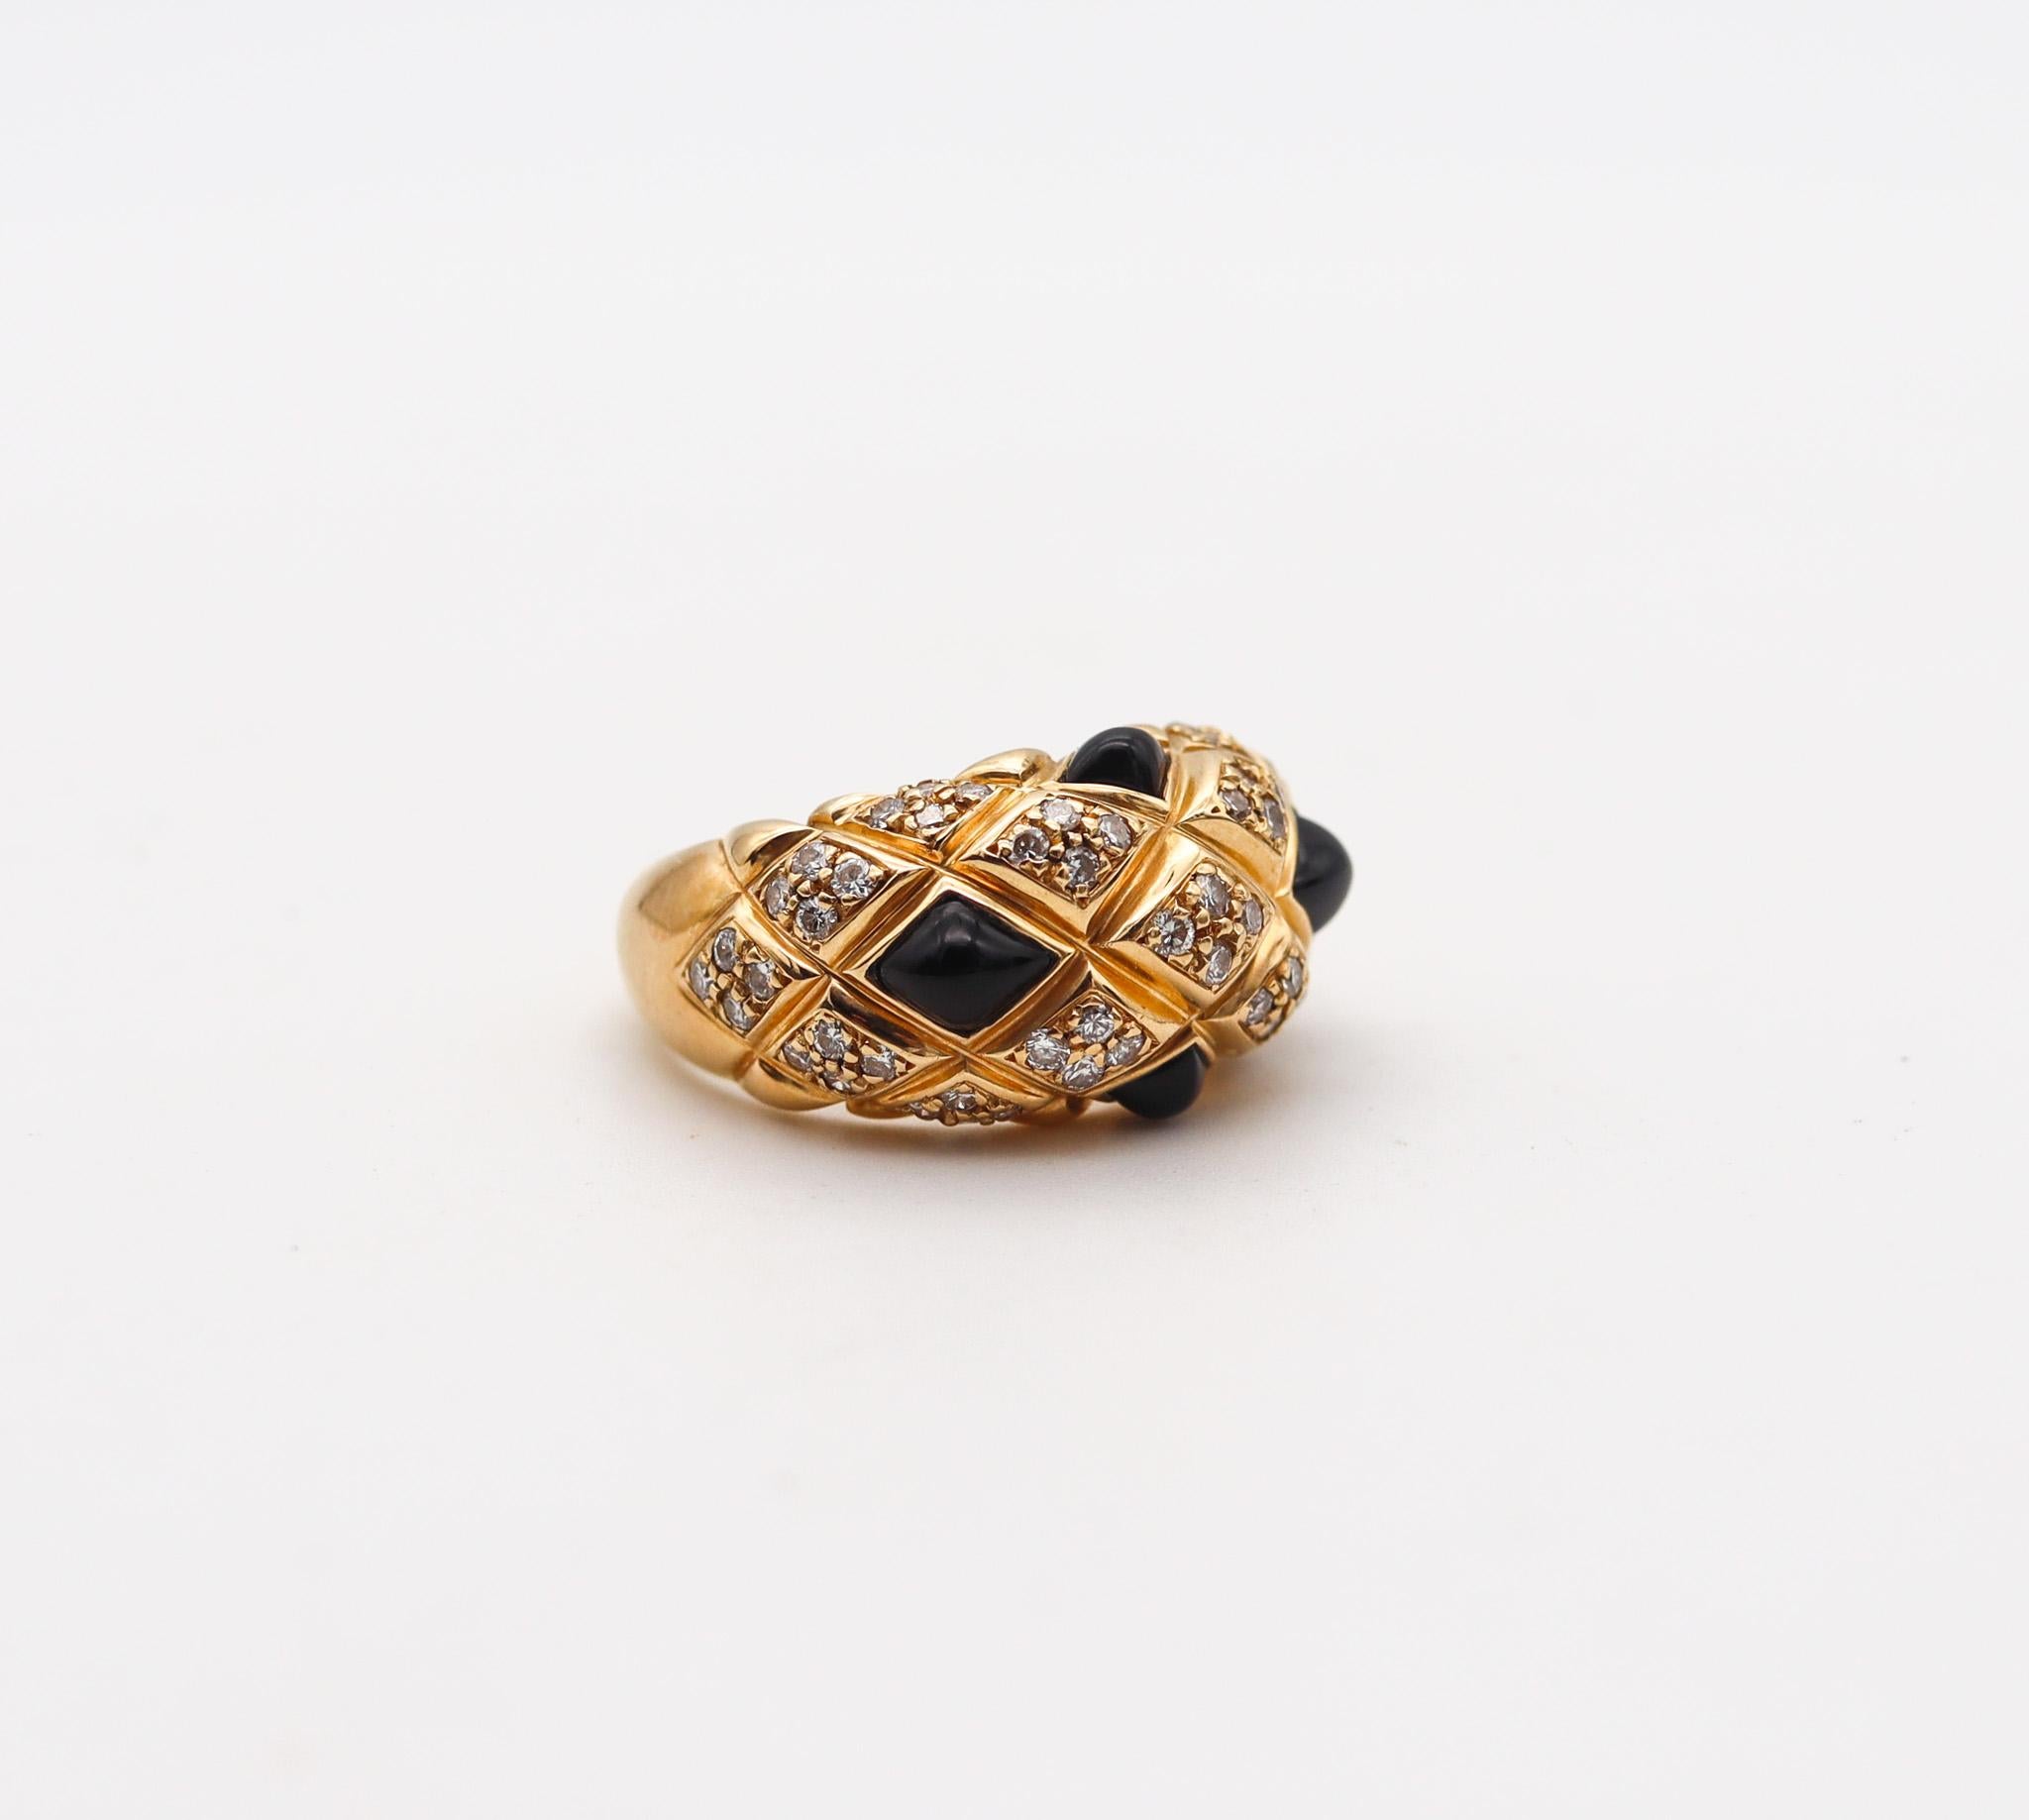 Modernist Chaumet Paris Quilted Cocktail Ring In 18Kt Gold With 1.72 Ctw Diamonds And Onyx For Sale